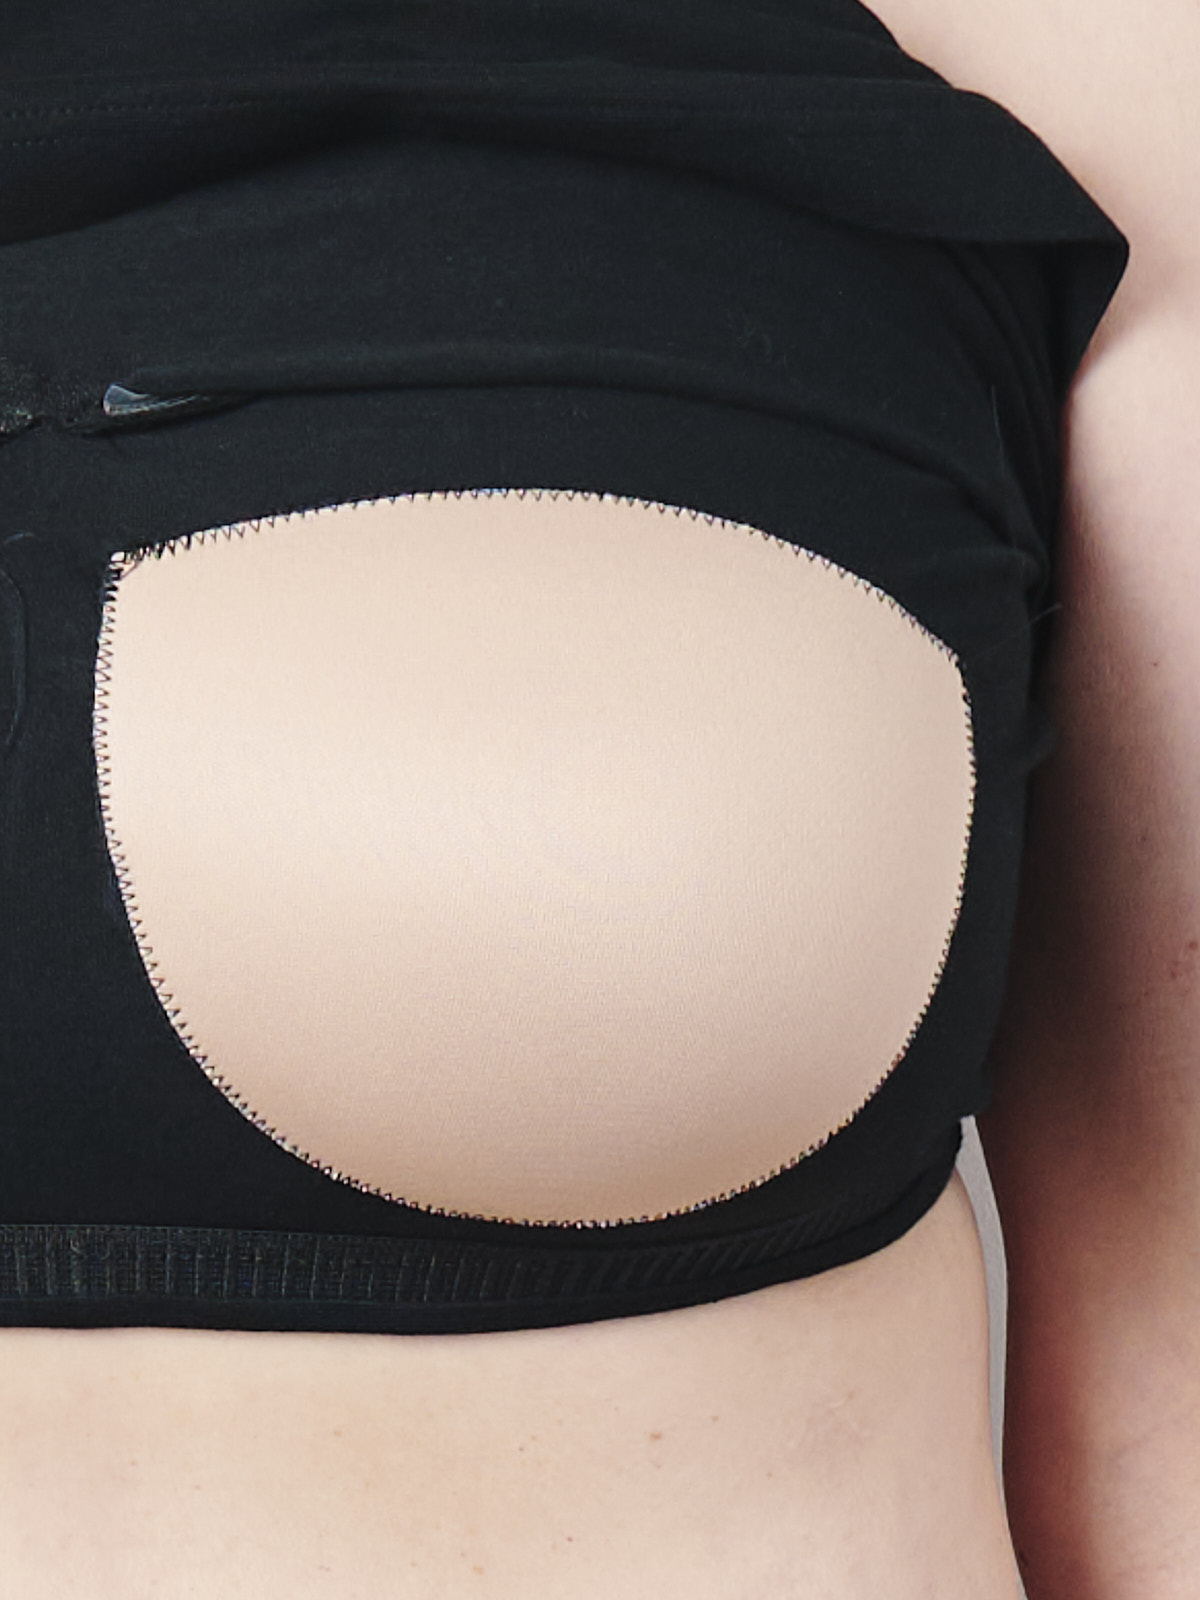 How to Sew a Built-In Bra (With Cups!)